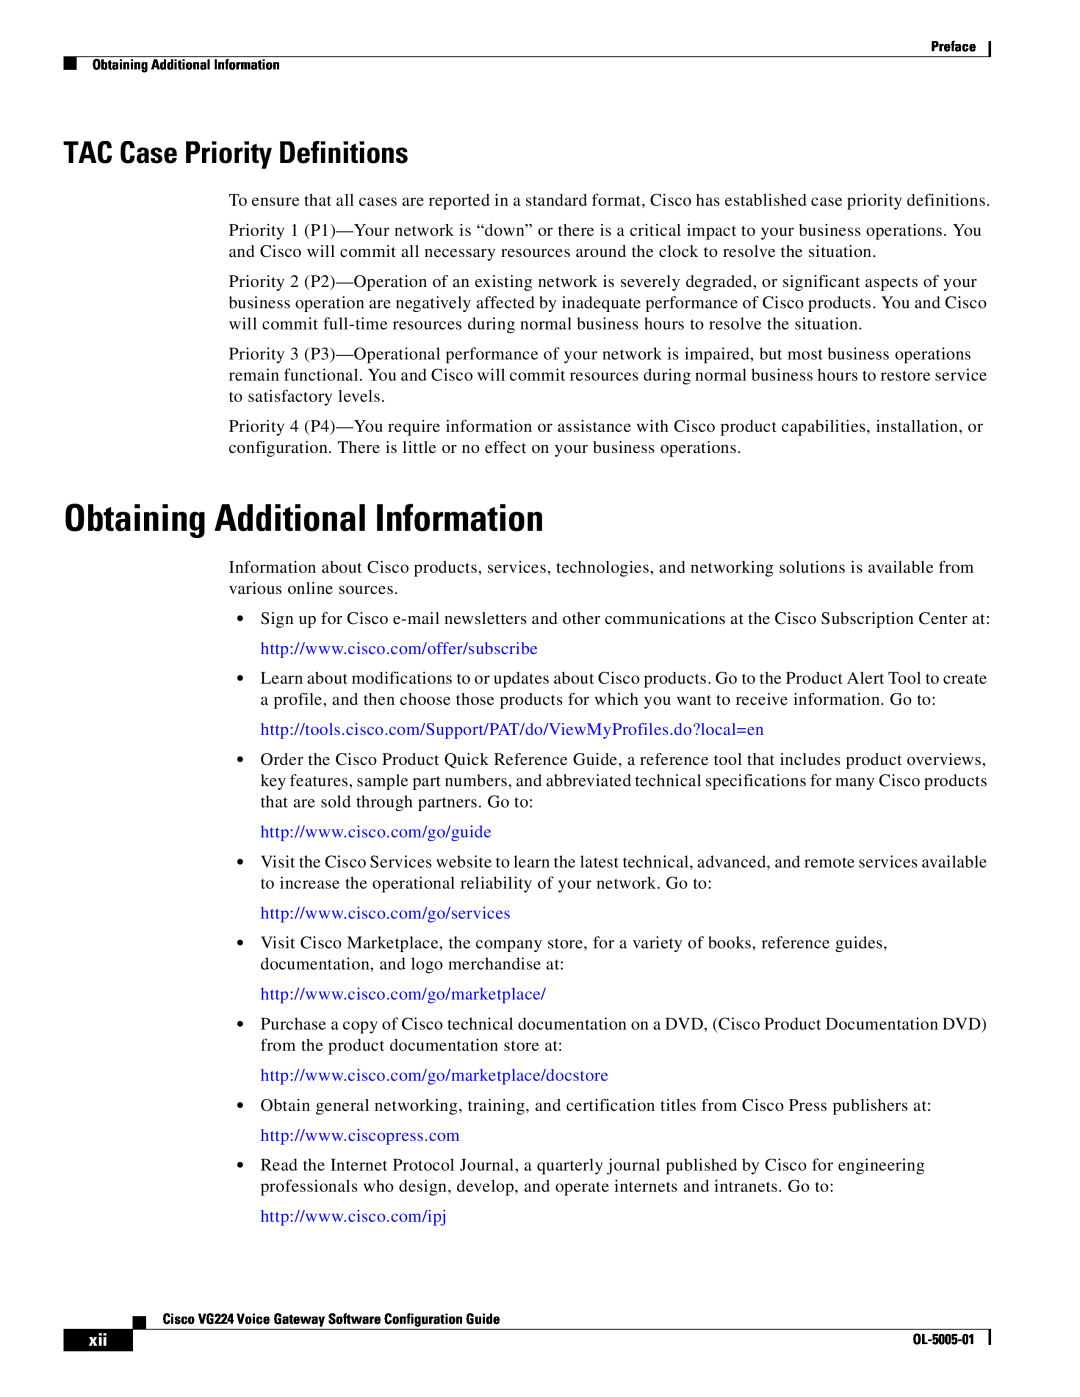 Cisco Systems VG224 manual Obtaining Additional Information, TAC Case Priority Definitions 